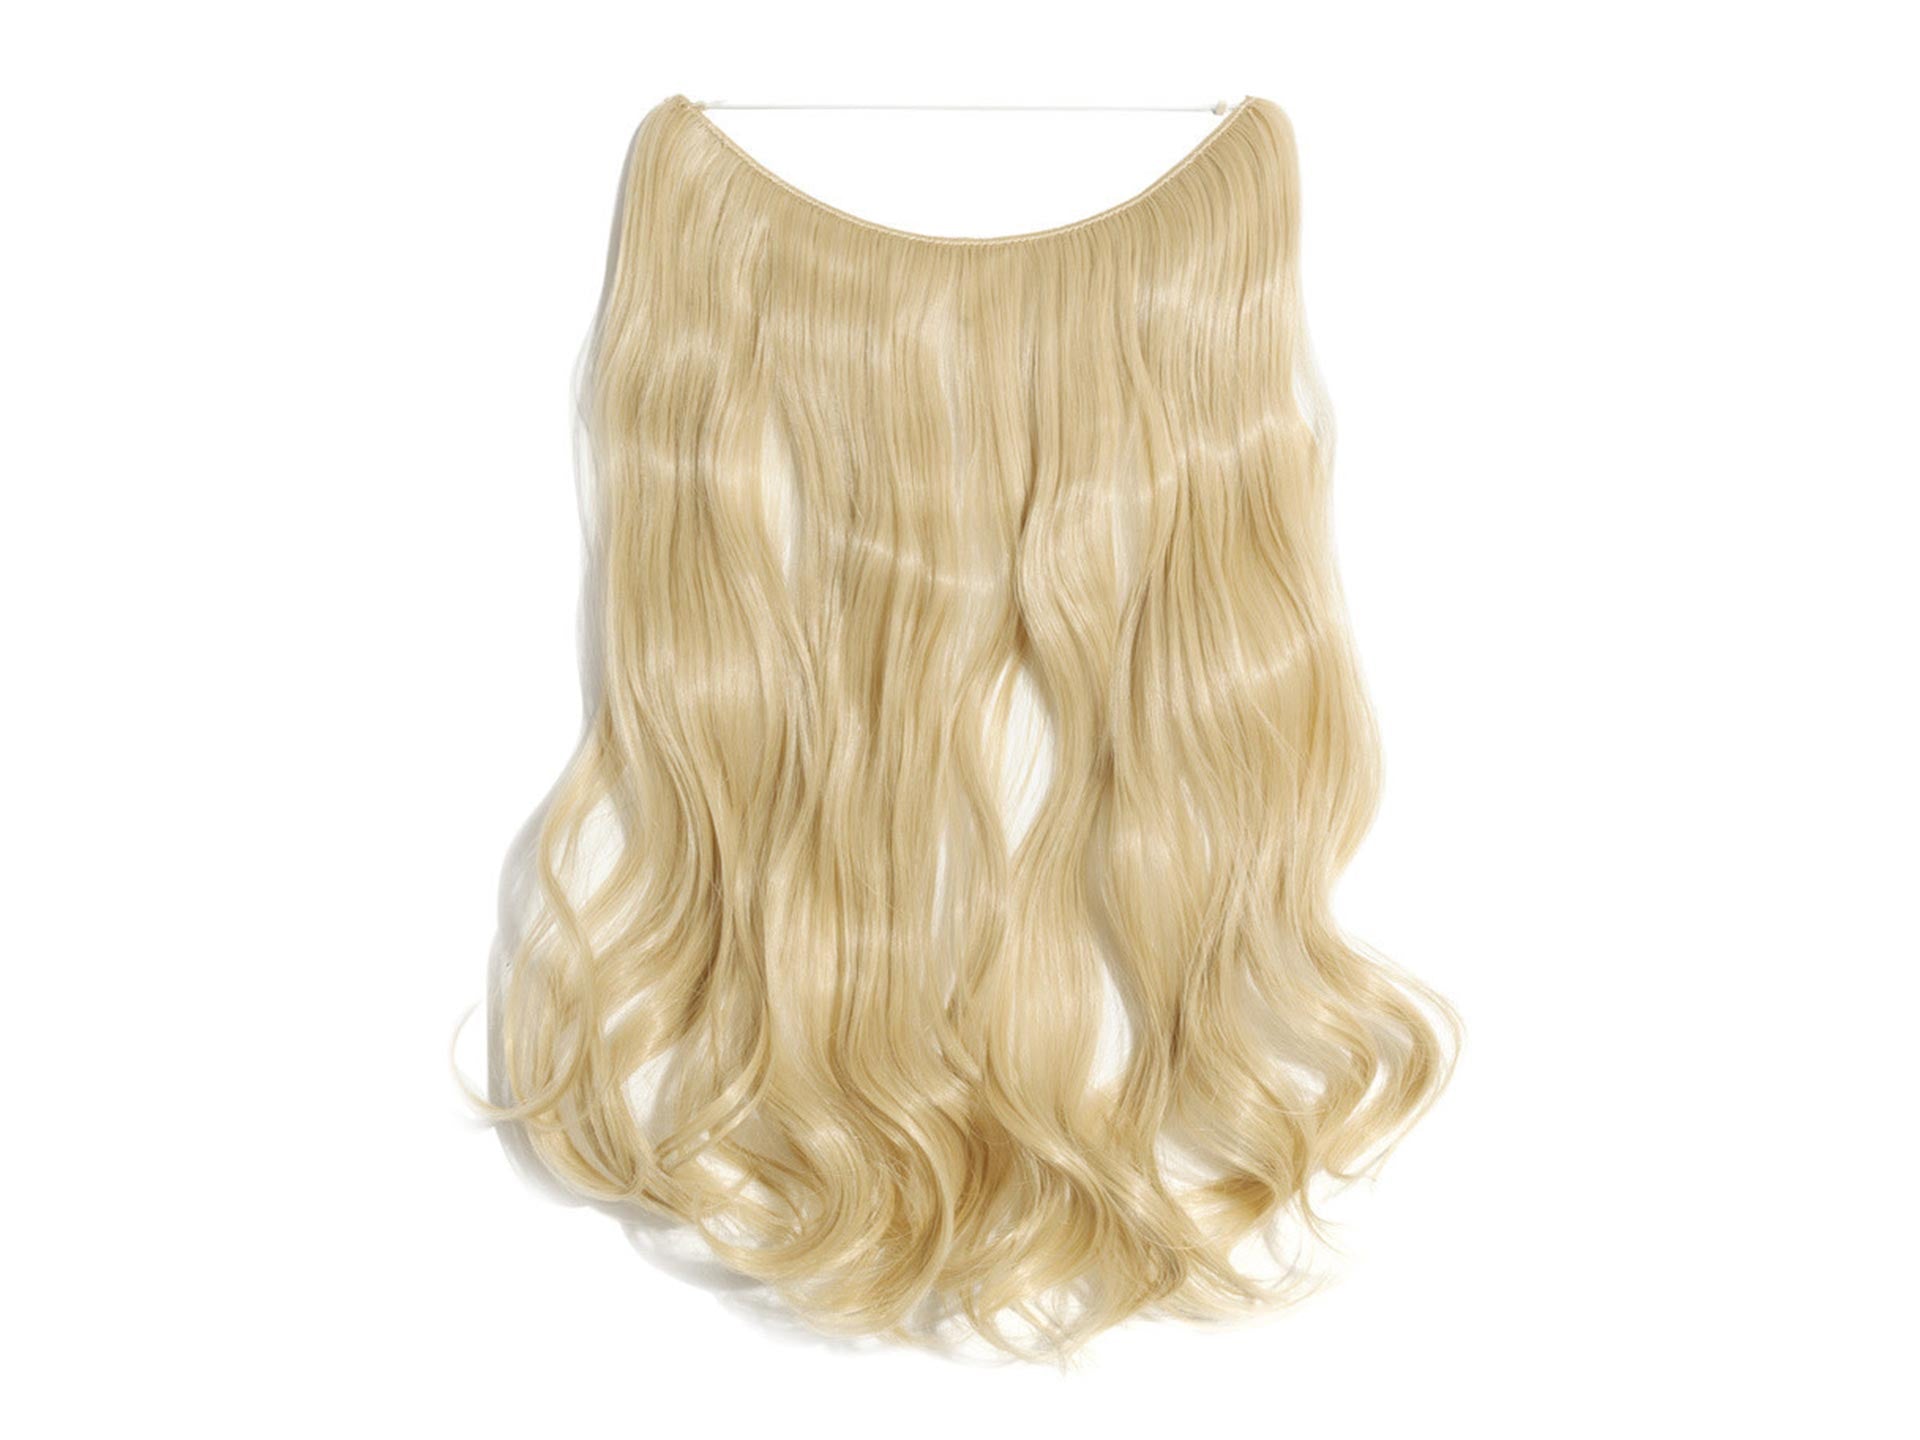 4. Lilac Blonde Halo Hair Extensions - wide 6